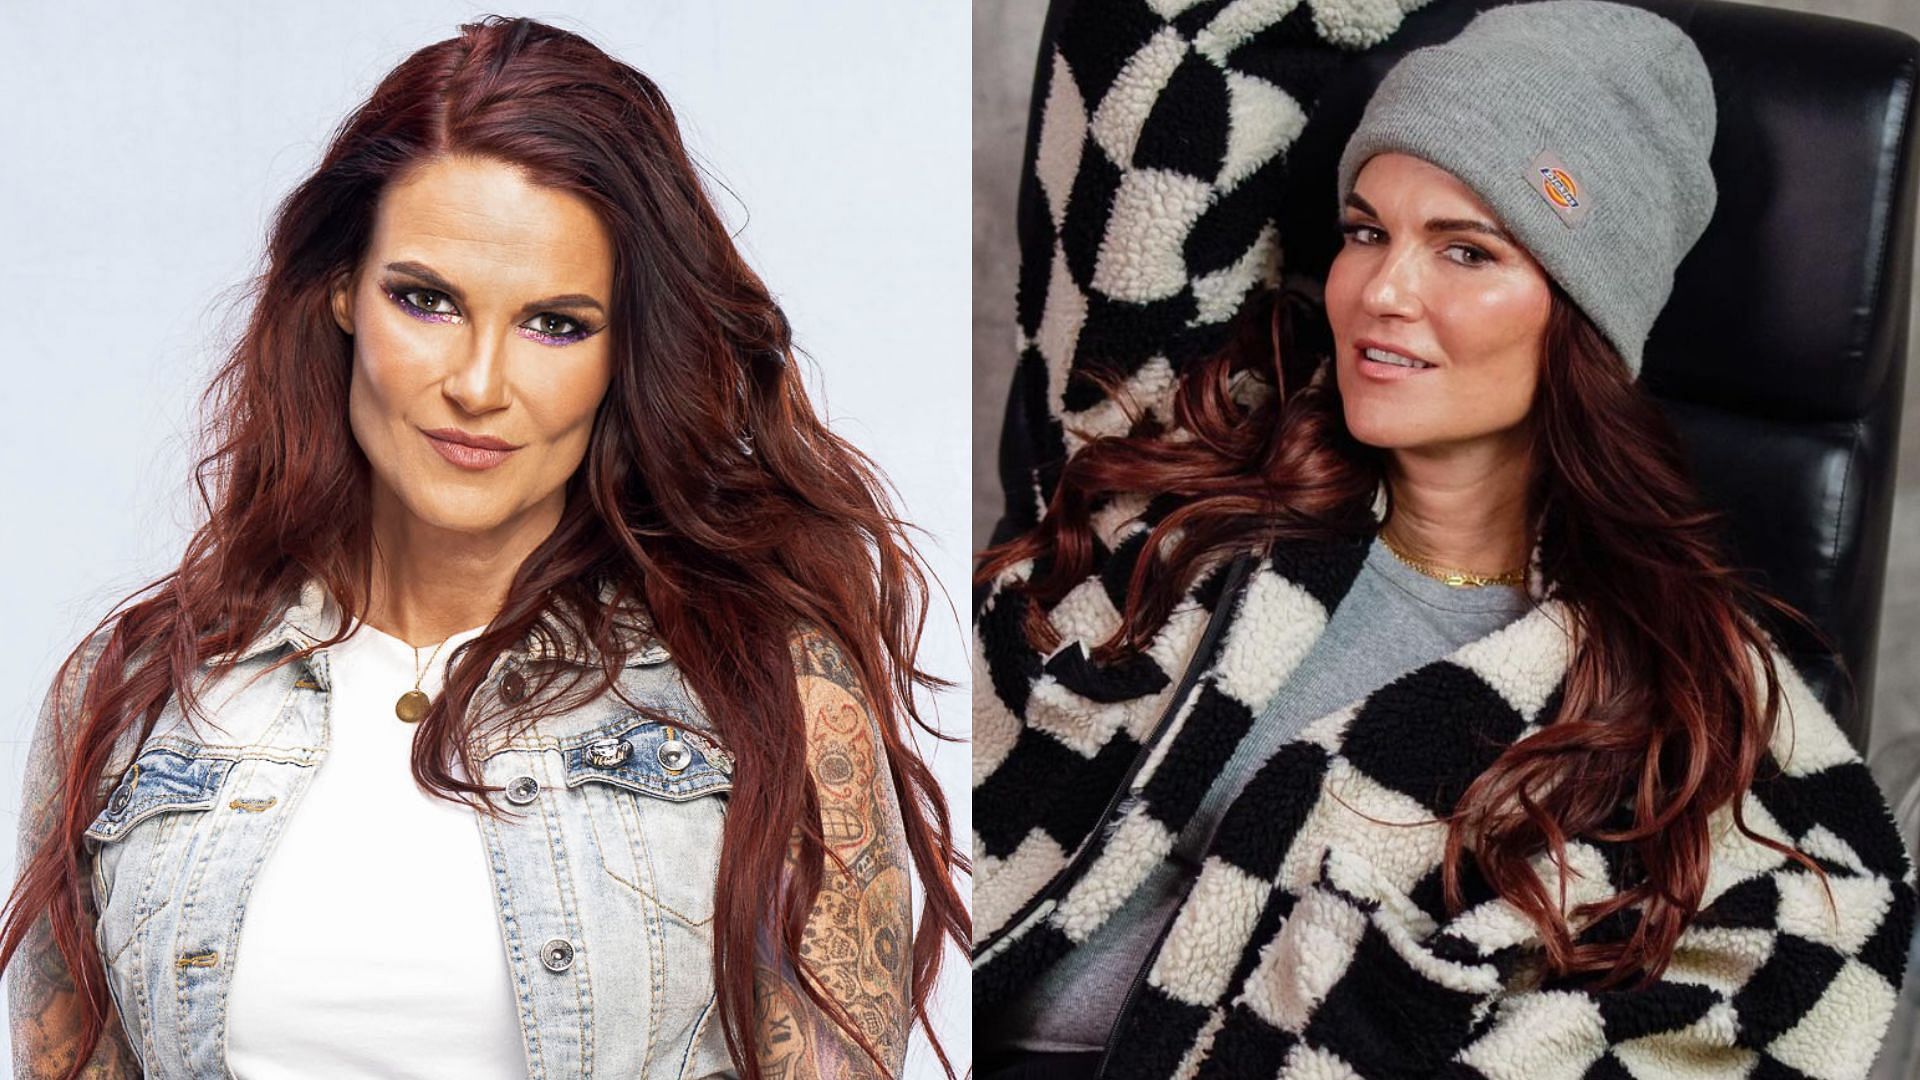 Lita was inducted into the Hall of Fame in 2014.